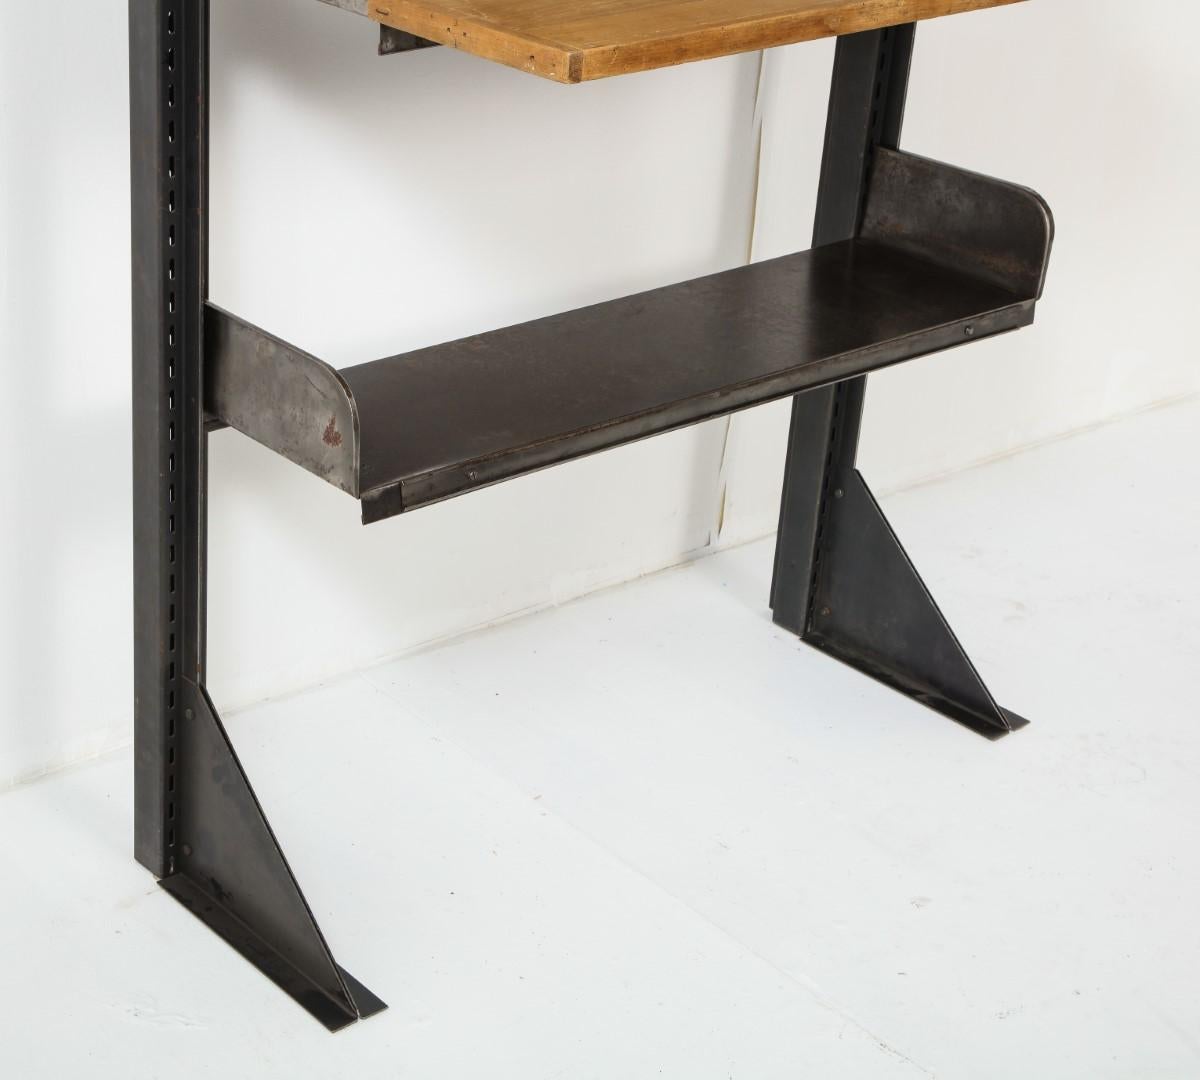 Midcentury French Industrial Iron Shelving System with Wood Desktop For Sale 5